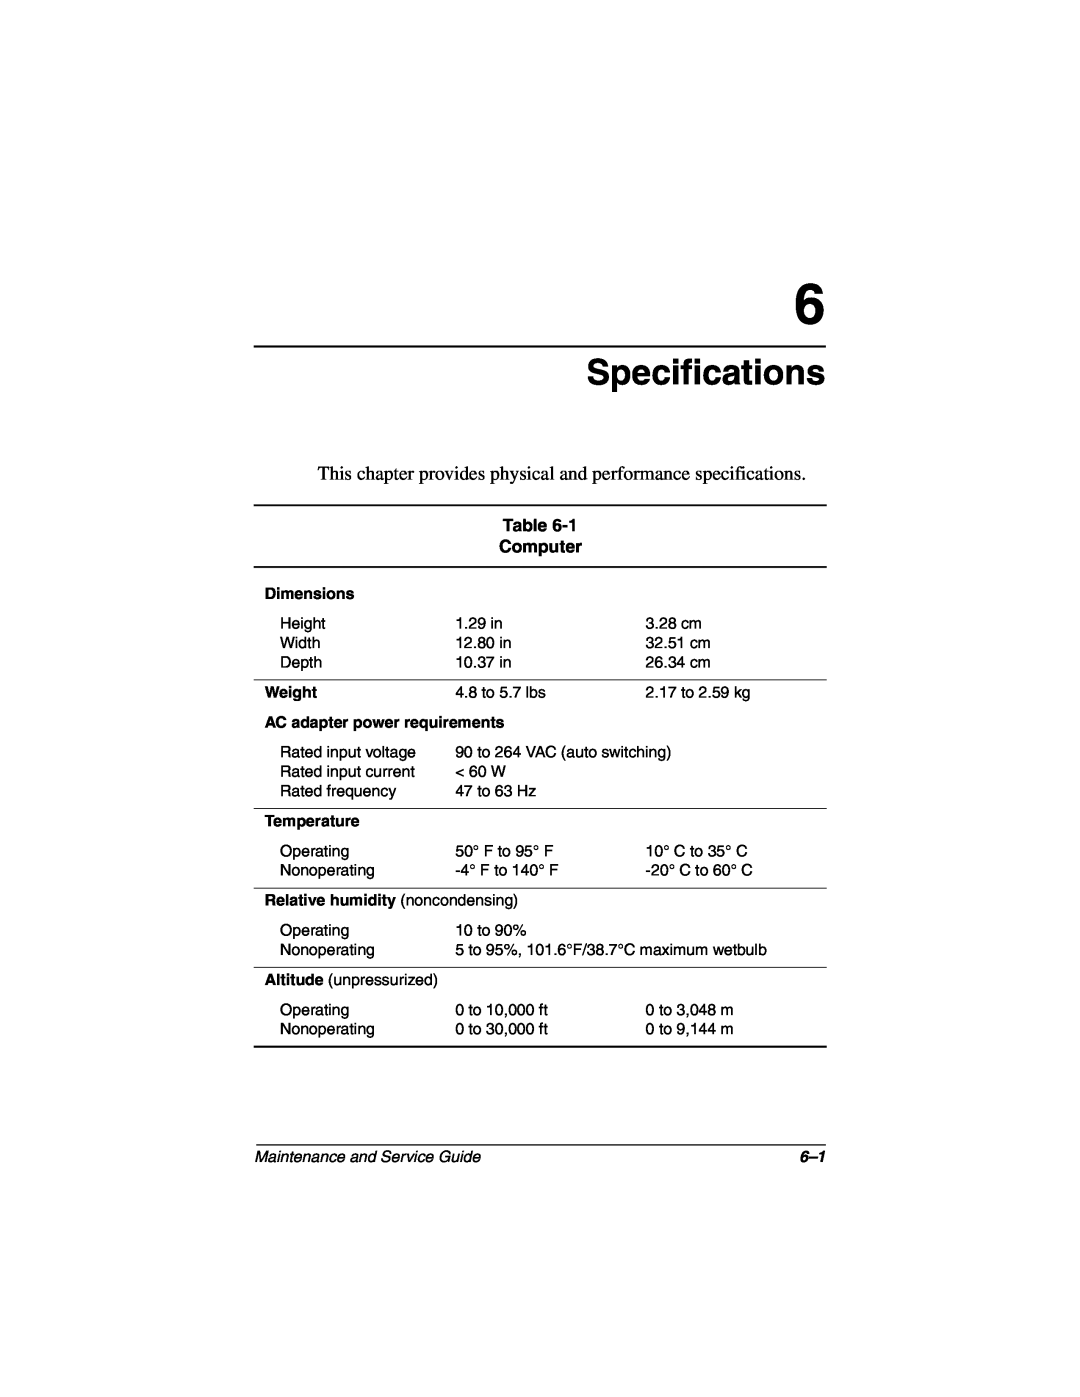 Compaq N160 manual Specifications, This chapter provides physical and performance specifications, Computer 